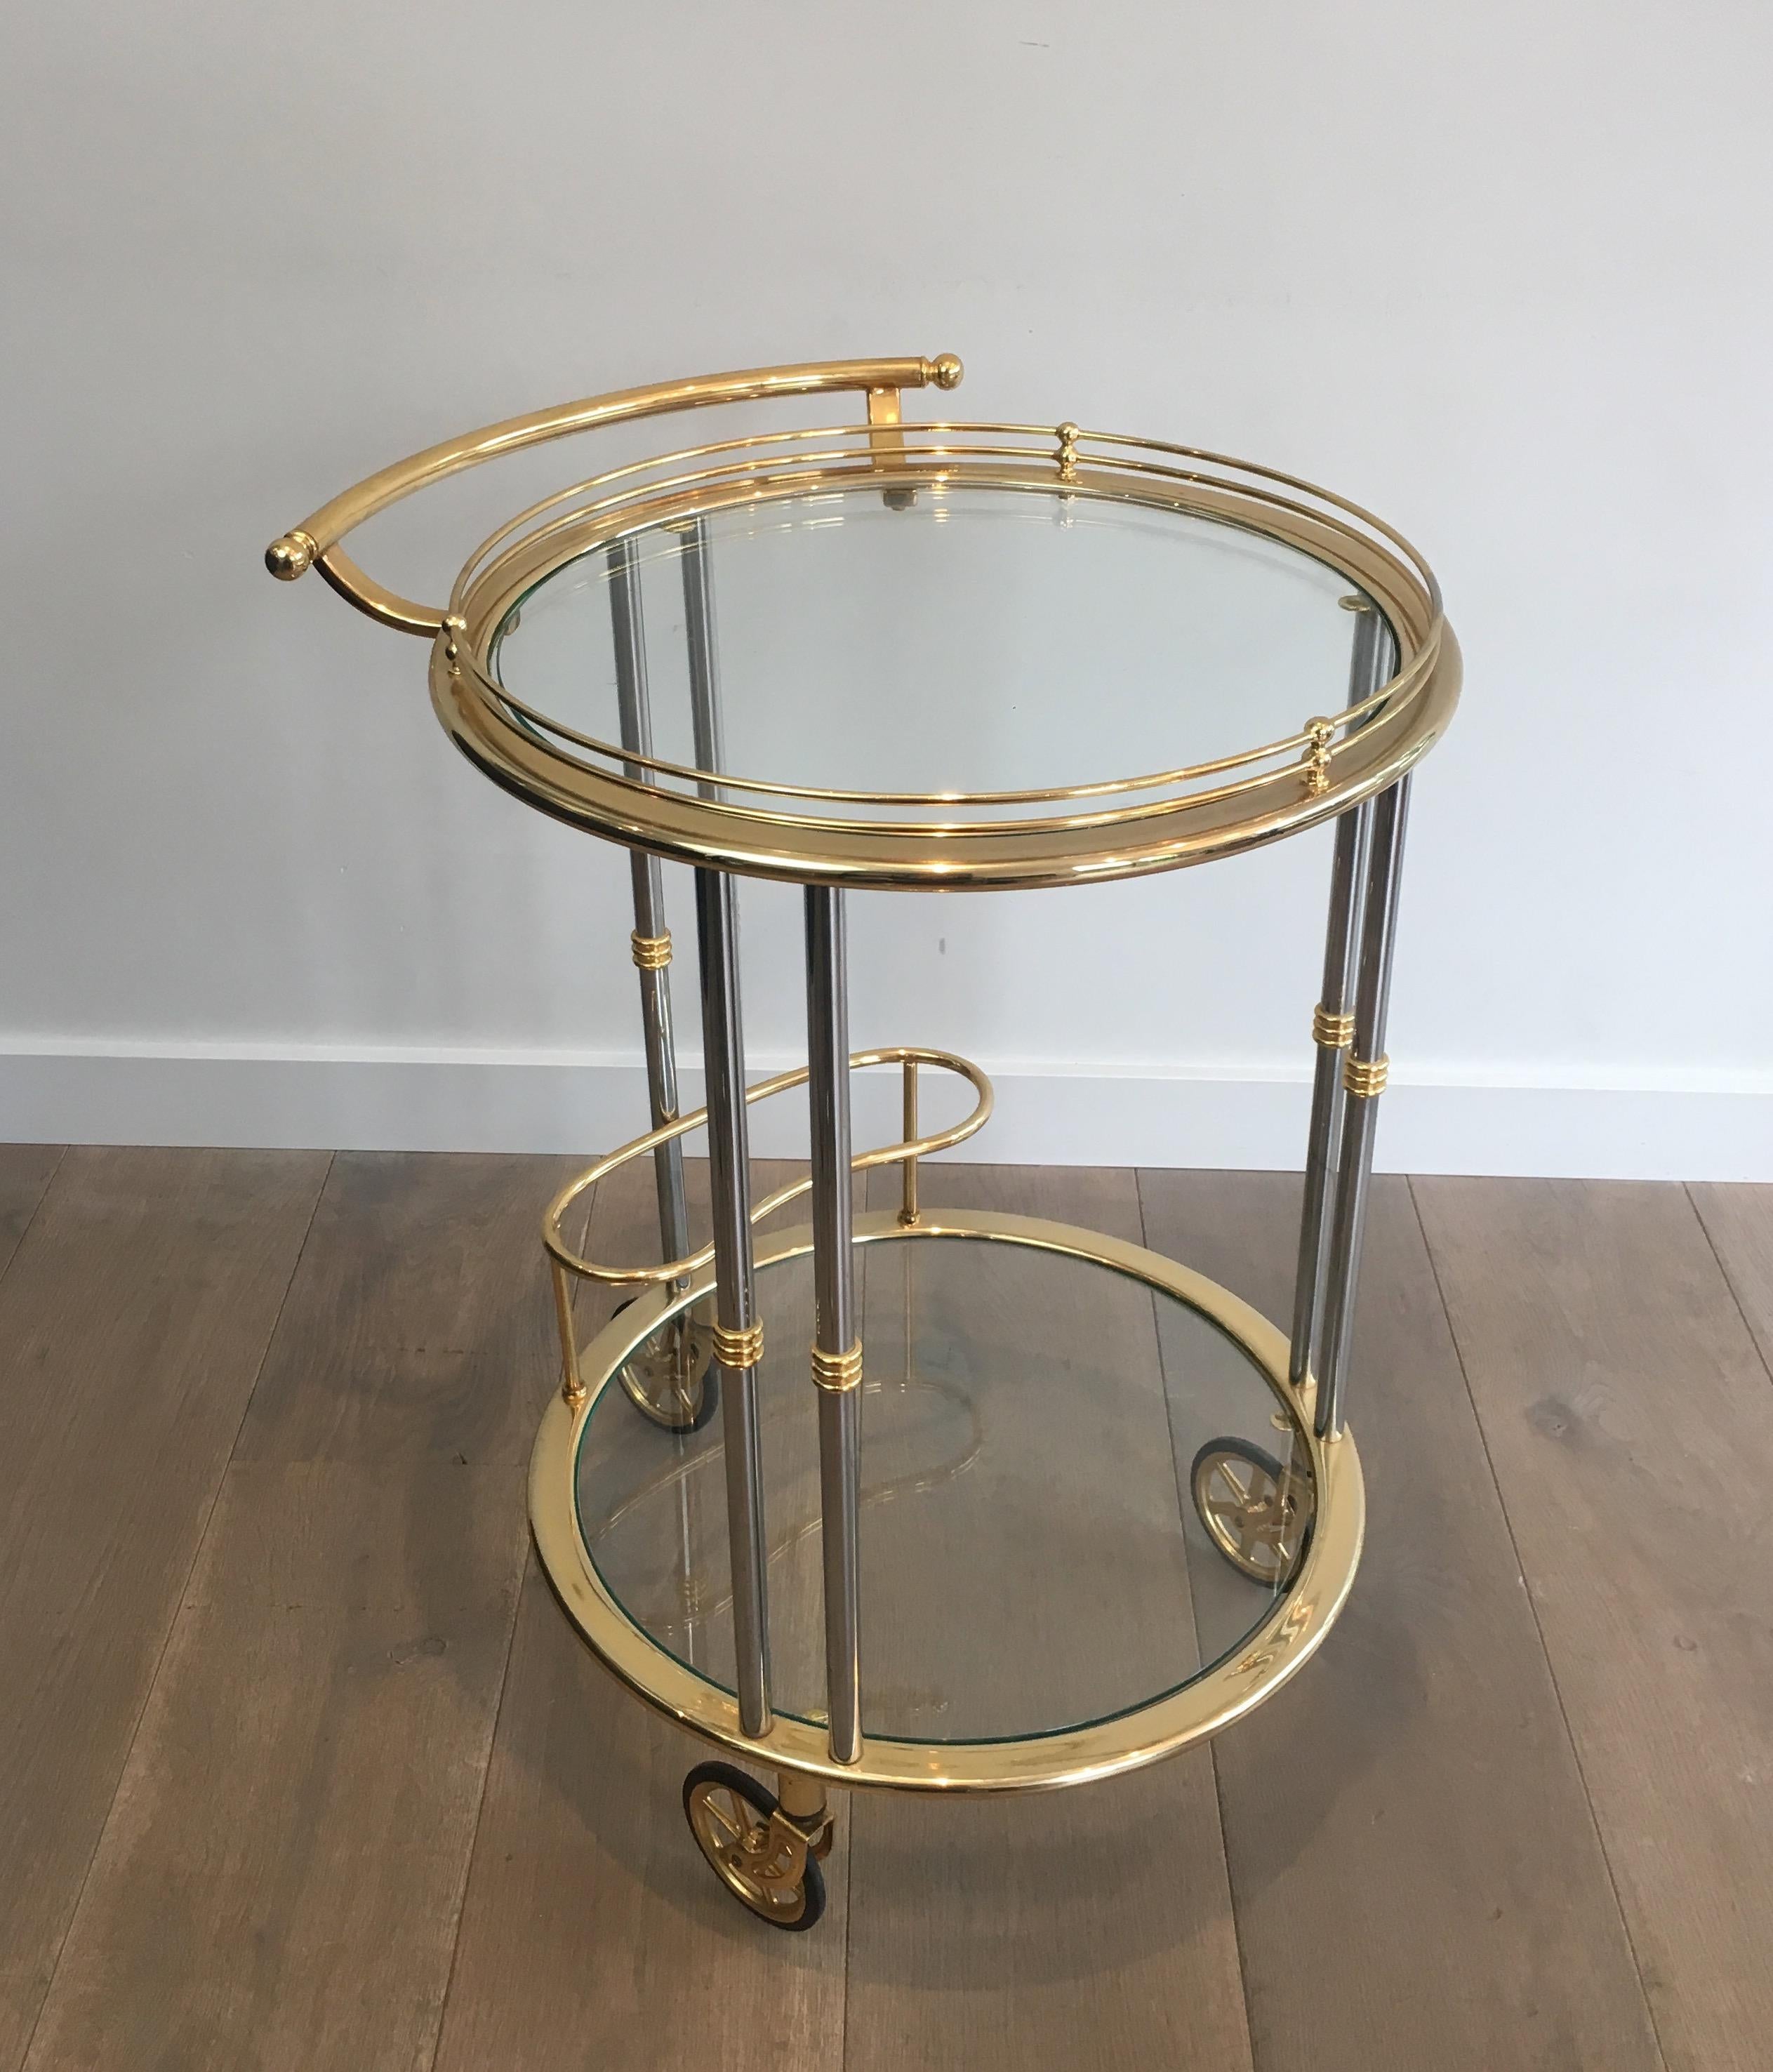 This round bar cart is made of gun metal and gilt metal with 2 clear glass shelves. This drinks trolley is a French work, circa 1970.